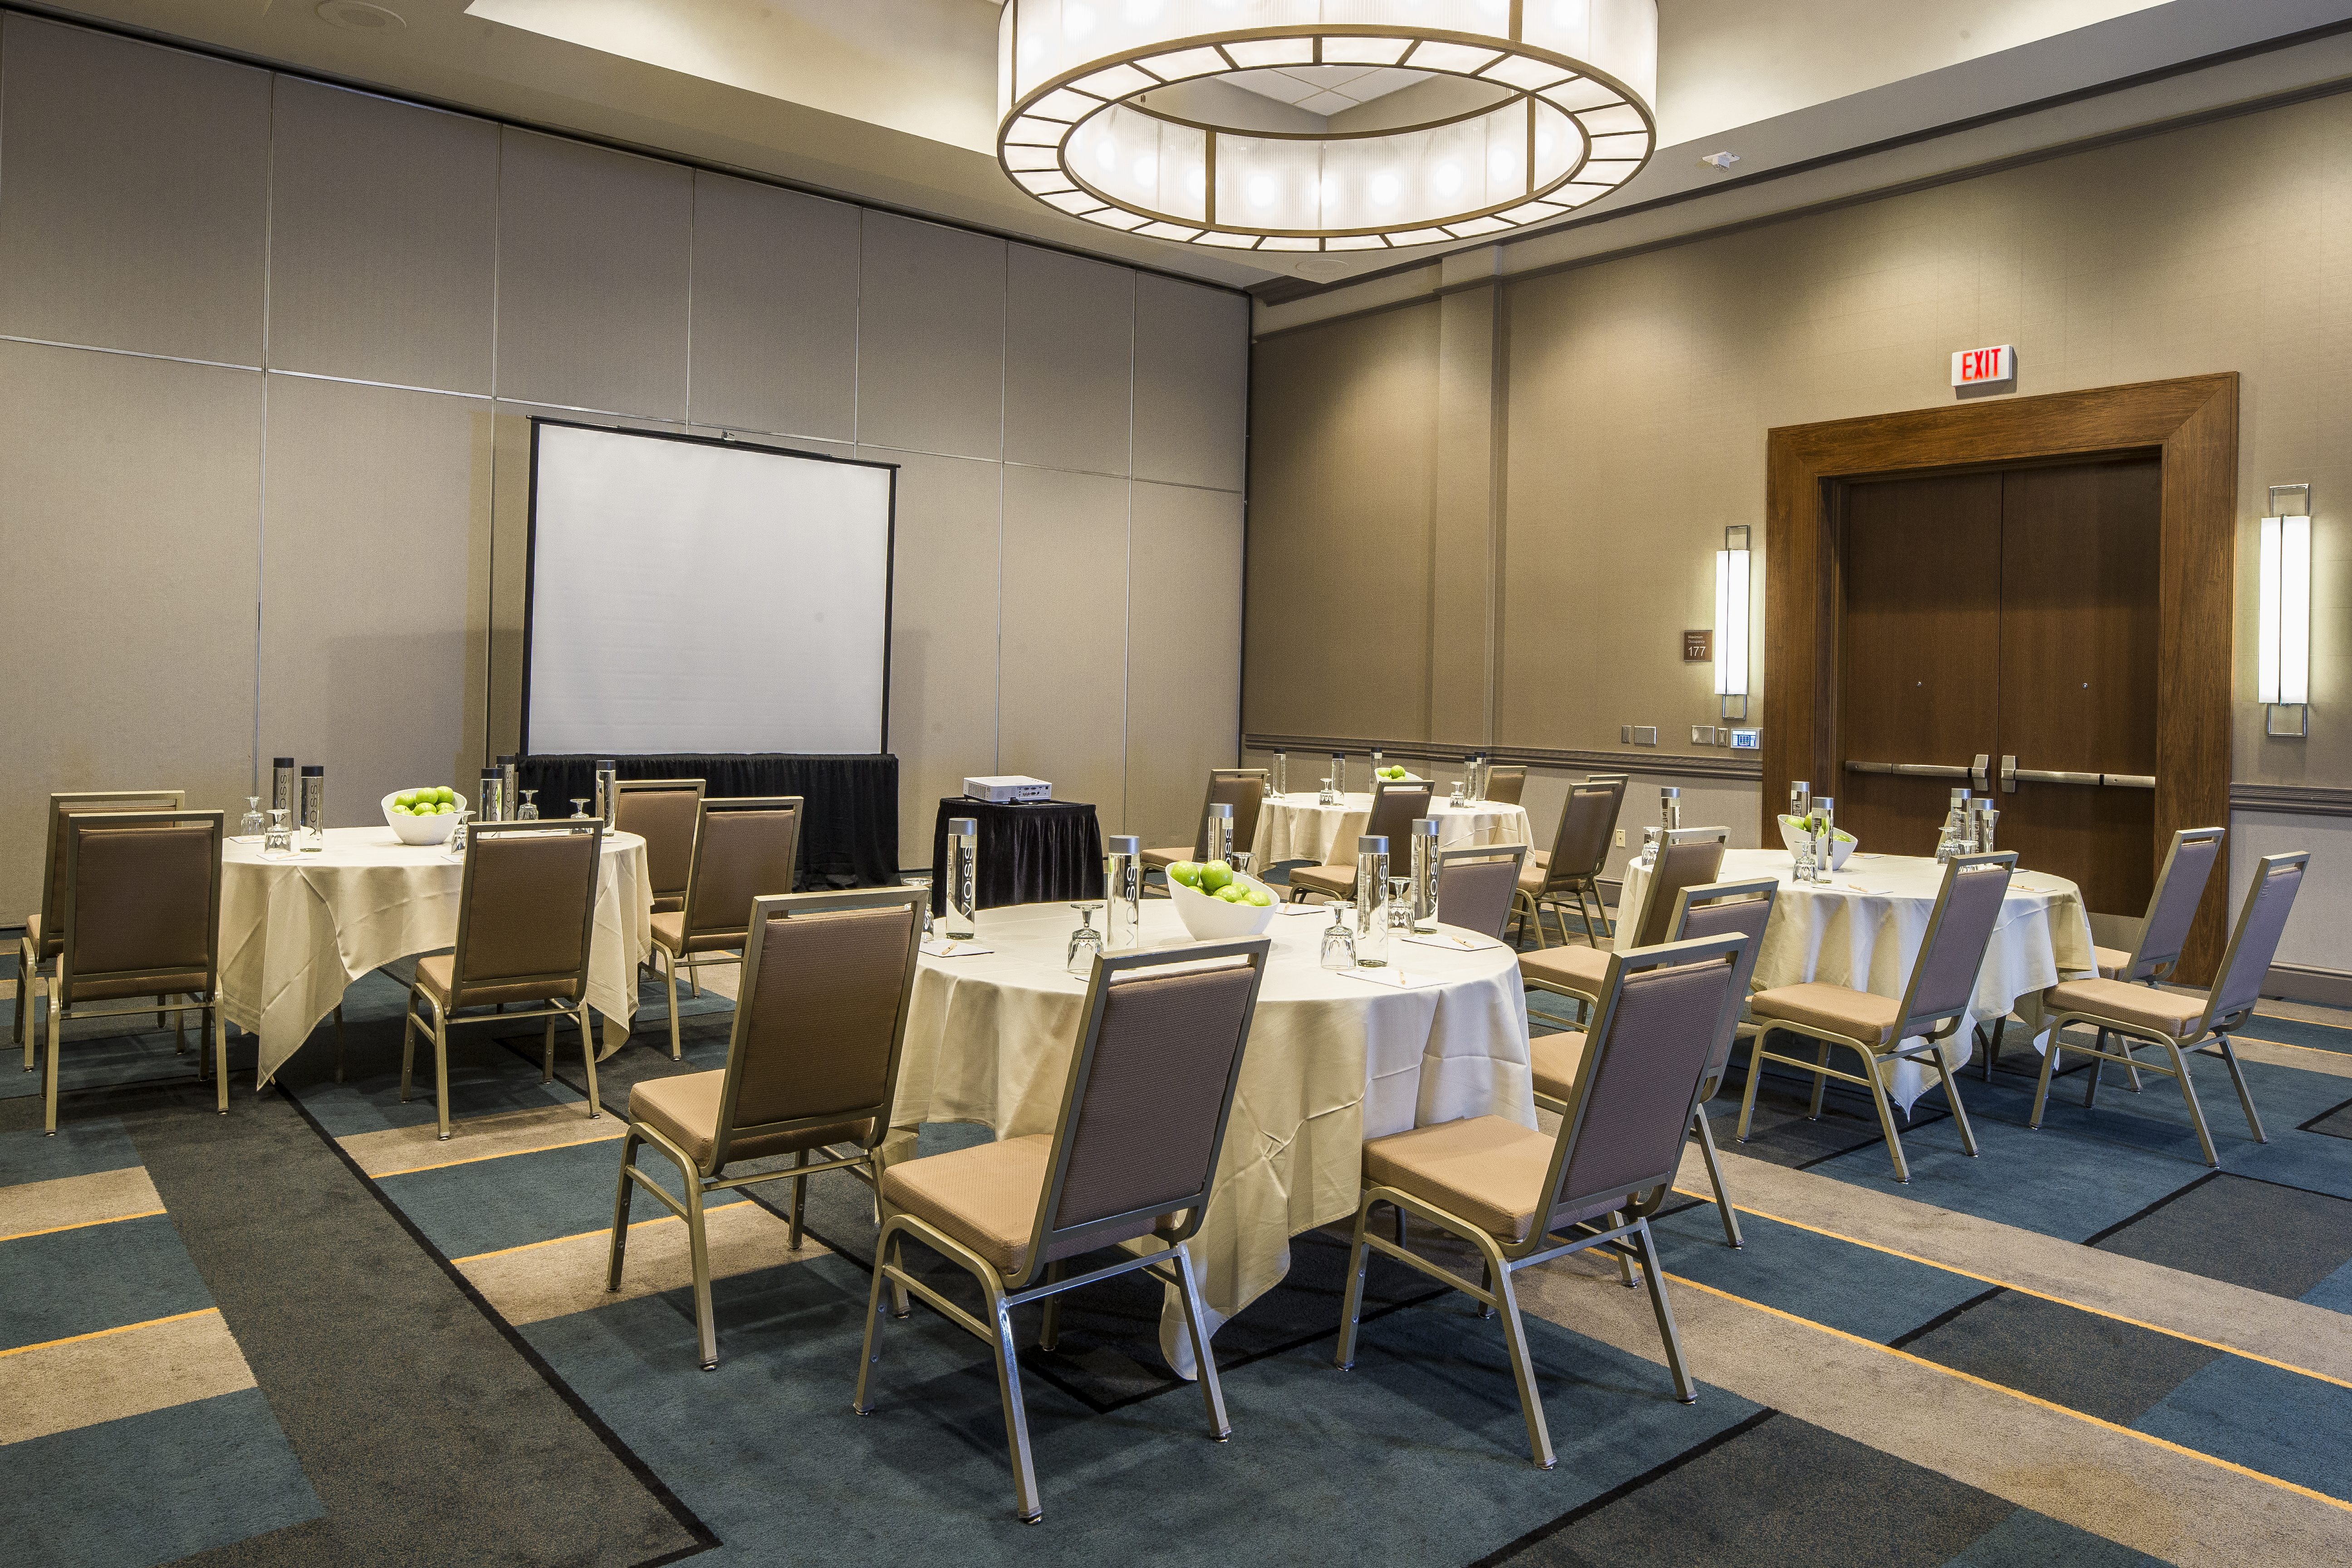 Meeting Room With Water Bottles, Bowl of Green Apples, Drinking Glasses, Notepads and Linens on Banquet Tables, Chairs, Projector Table, Presentation Screen, and Double Entry Doors